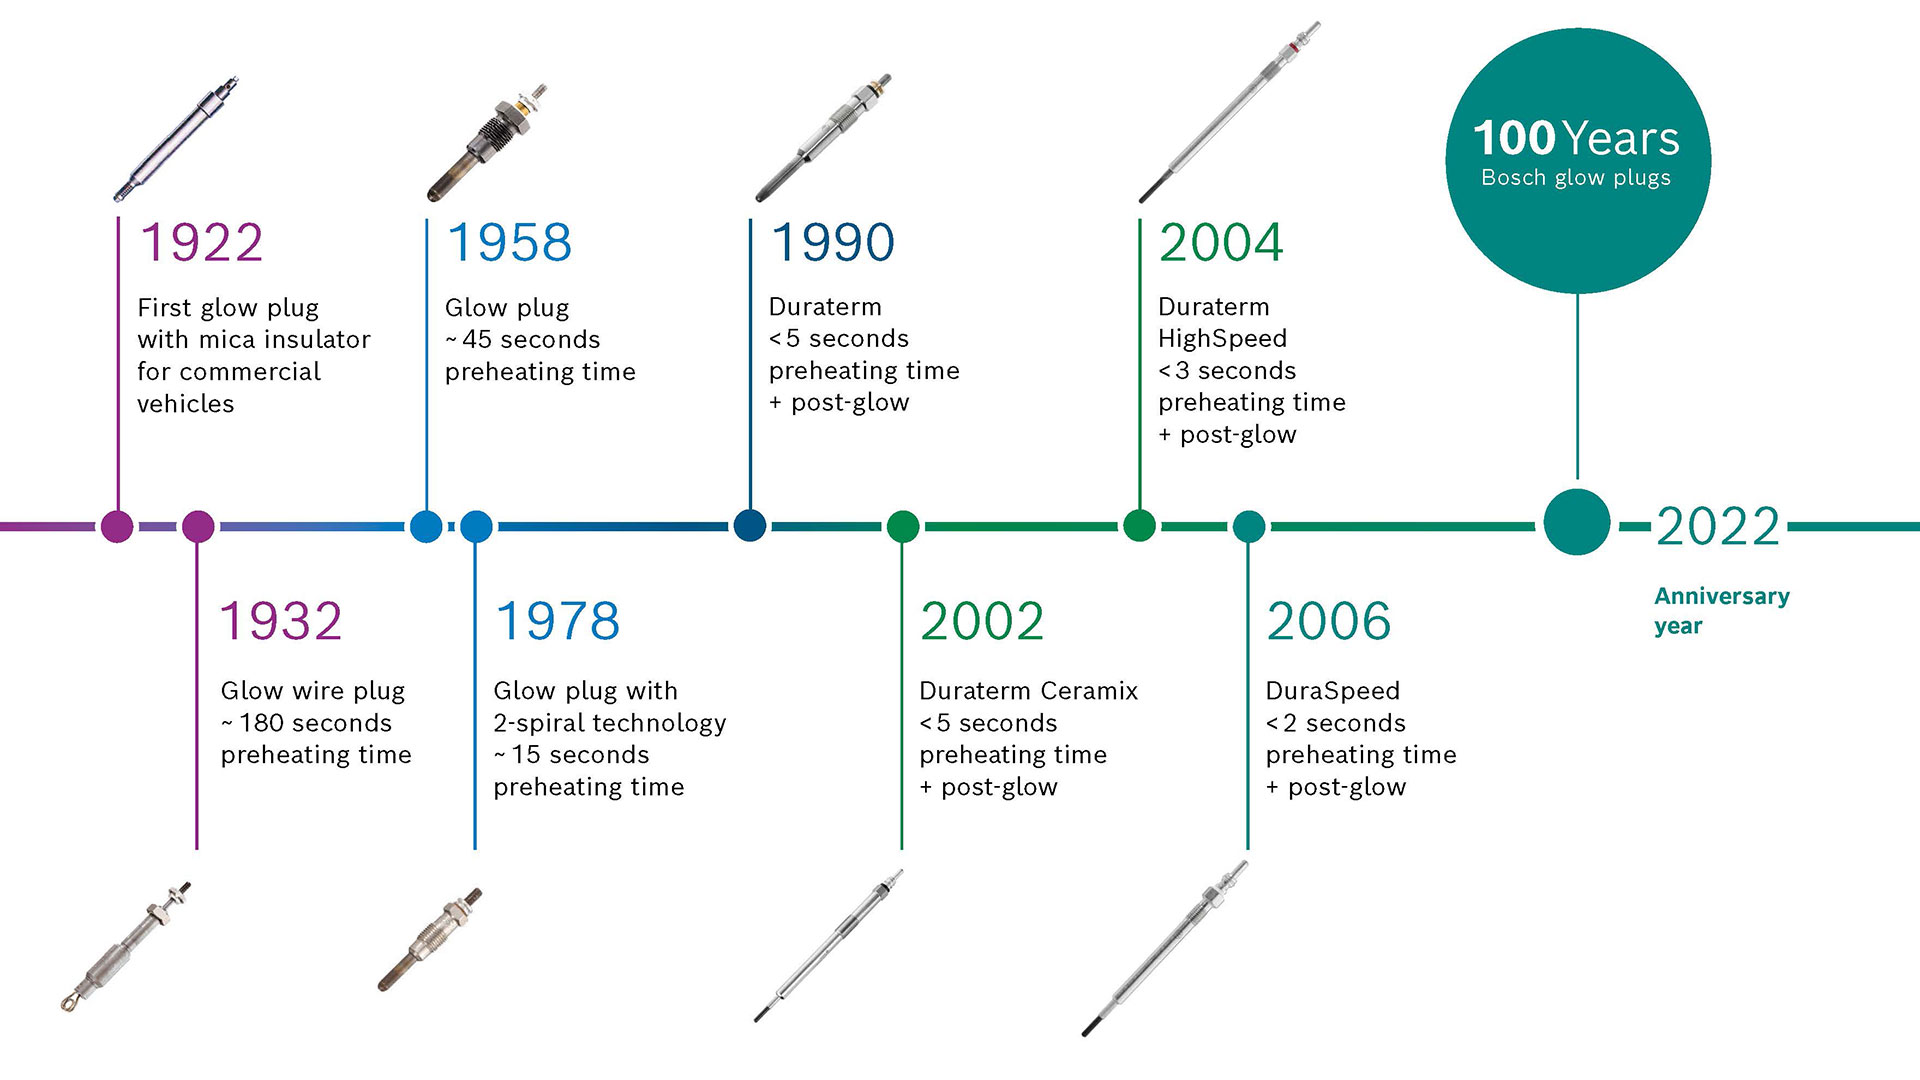 100 Years Timeline from 1922 to 2022 with images of plugs throughout the years